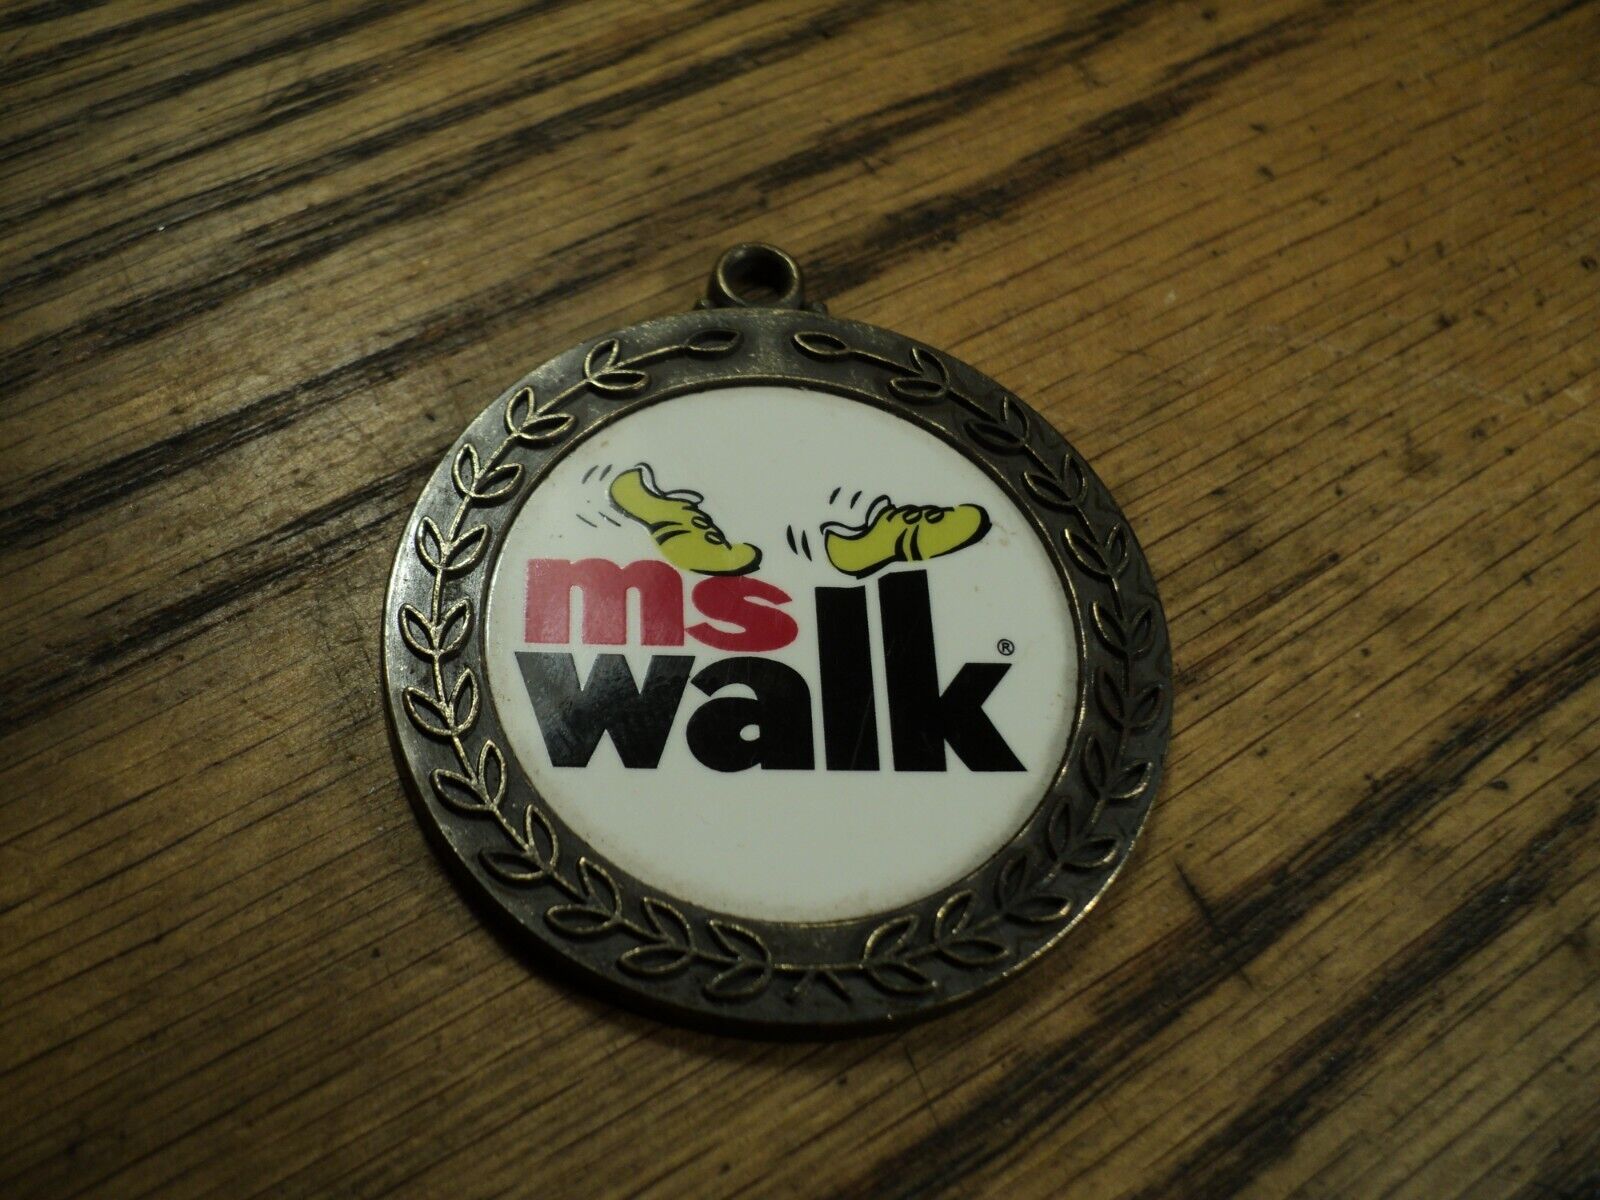 MS Walk 2002 National Multiple Sclerosis Society Key Chain Fob - 1-15/16\